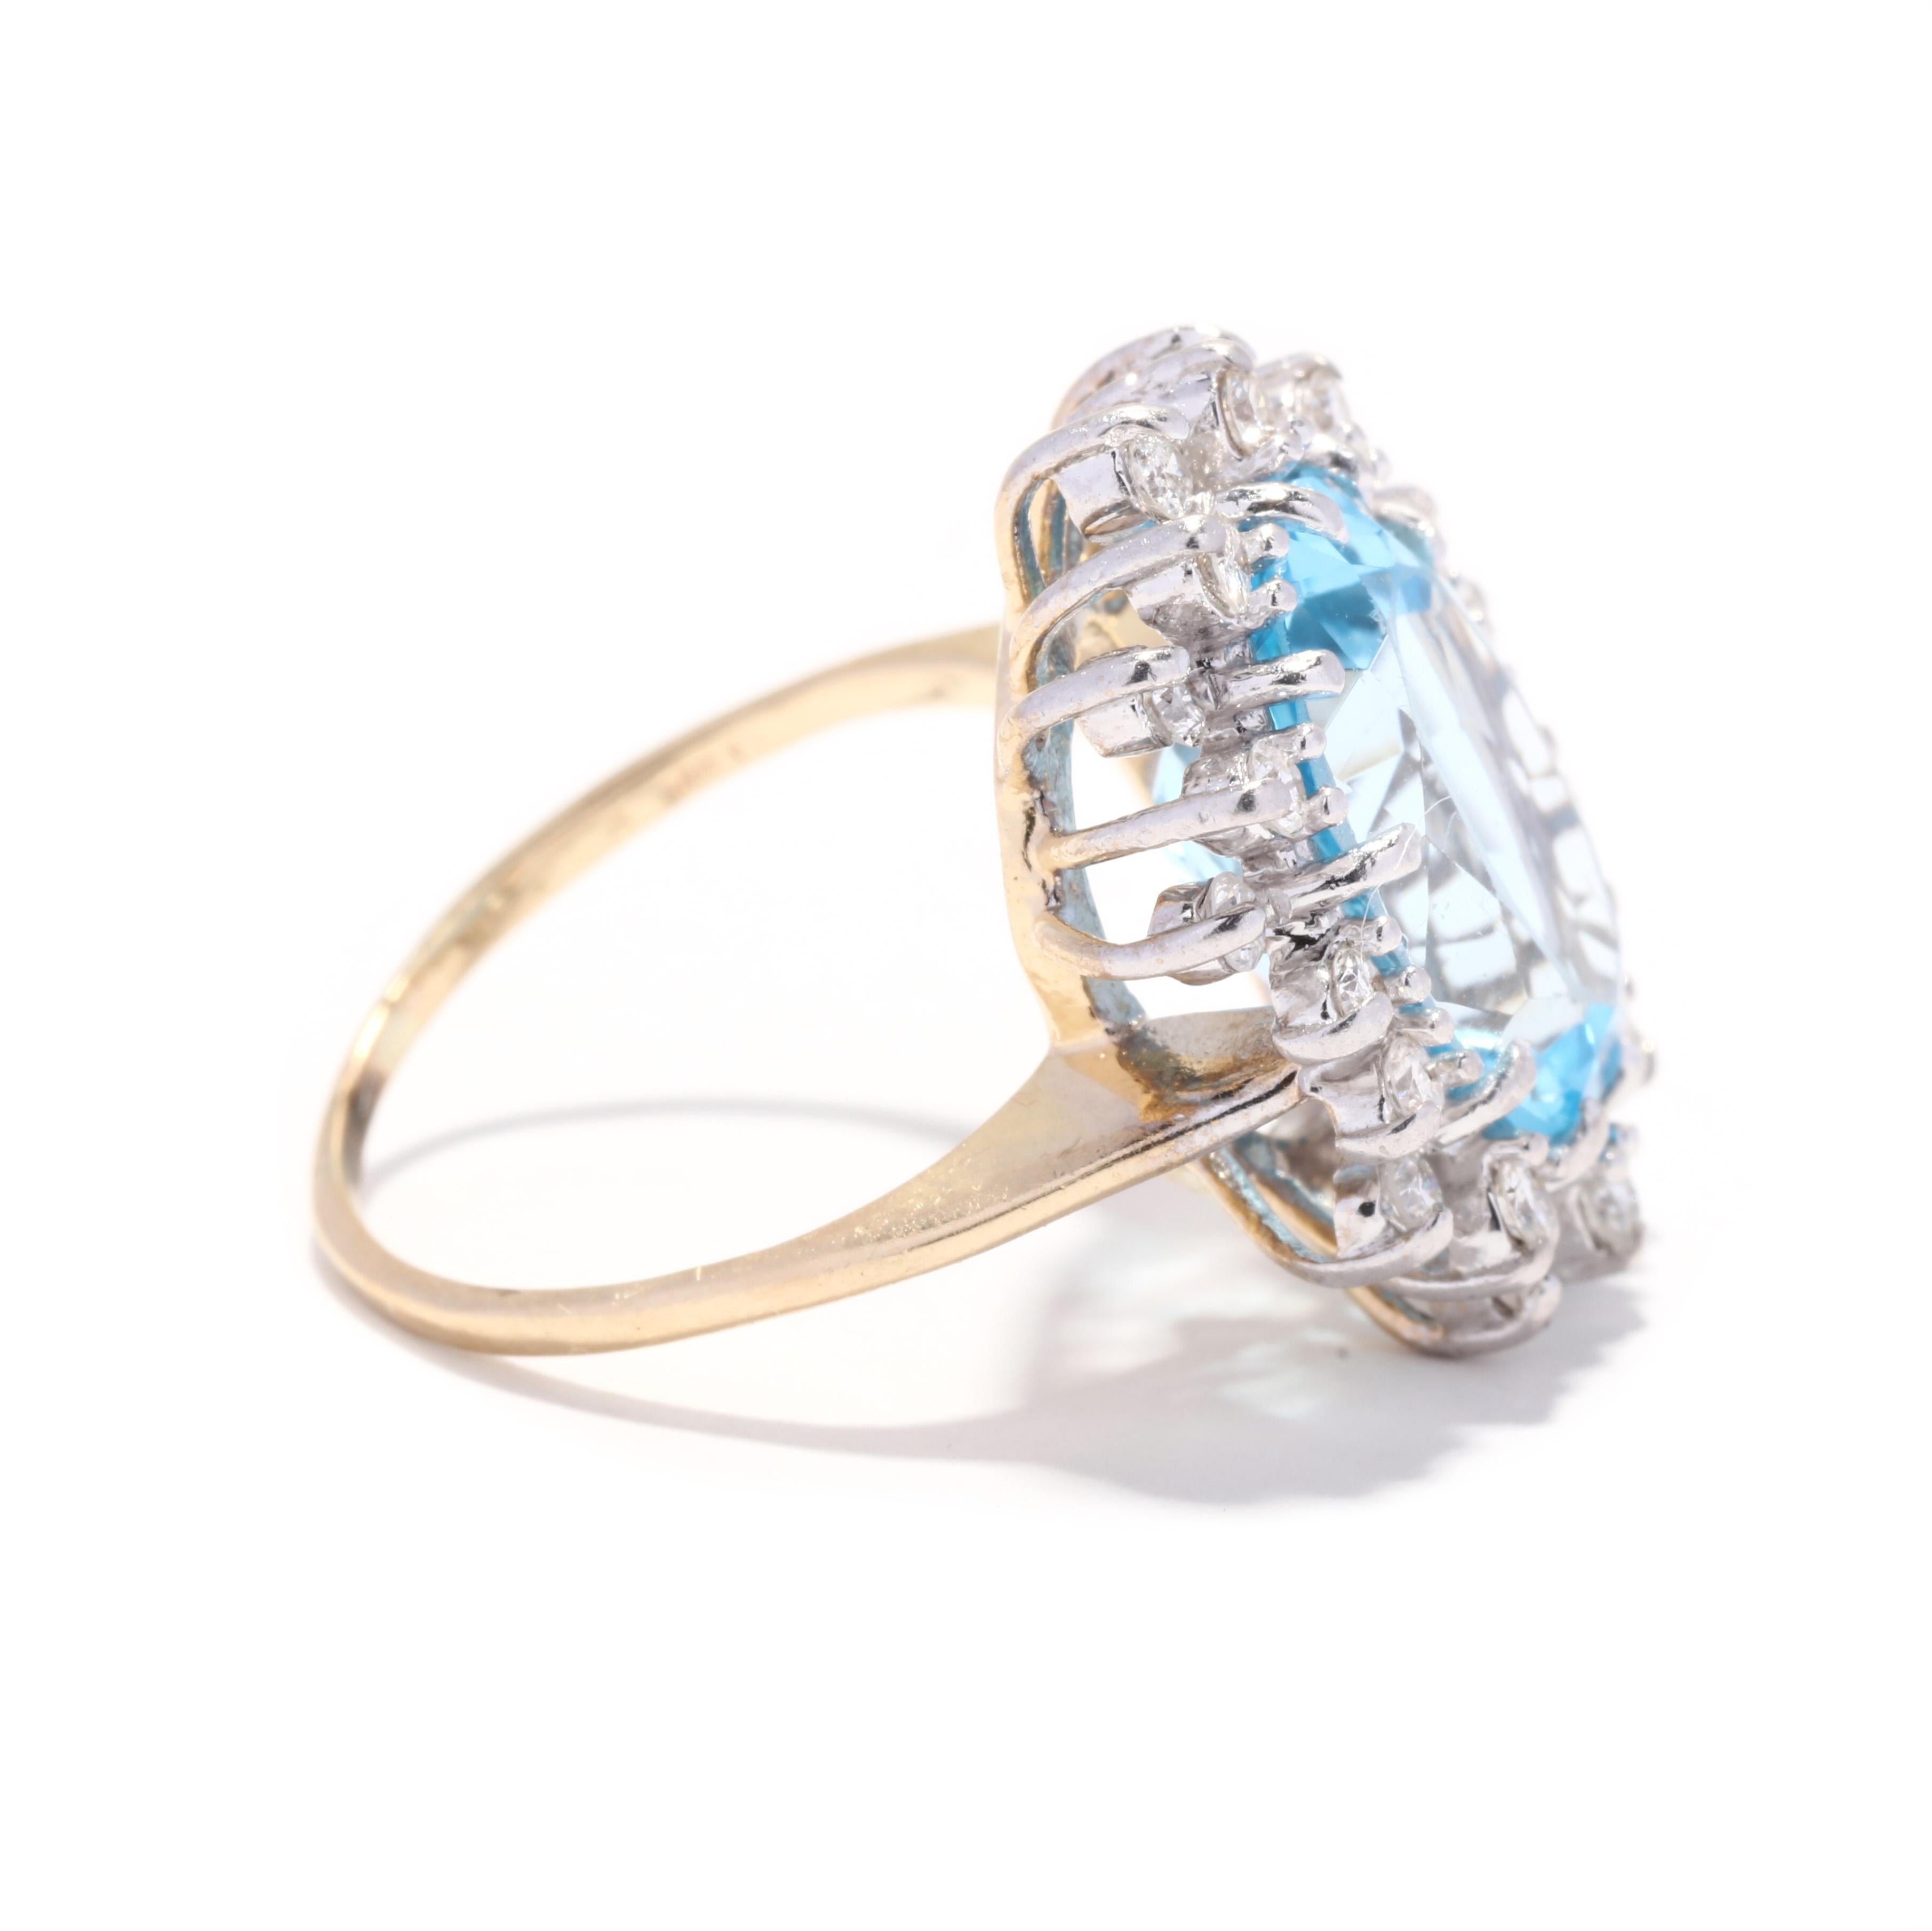 A vintage 14 karat yellow gold blue topaz and diamond halo cocktail ring. This December birthstone ring features a large prong set, oval cut blue topaz center stone weighing approximately 6.37 carat surrounded by a halo of round brilliant cut